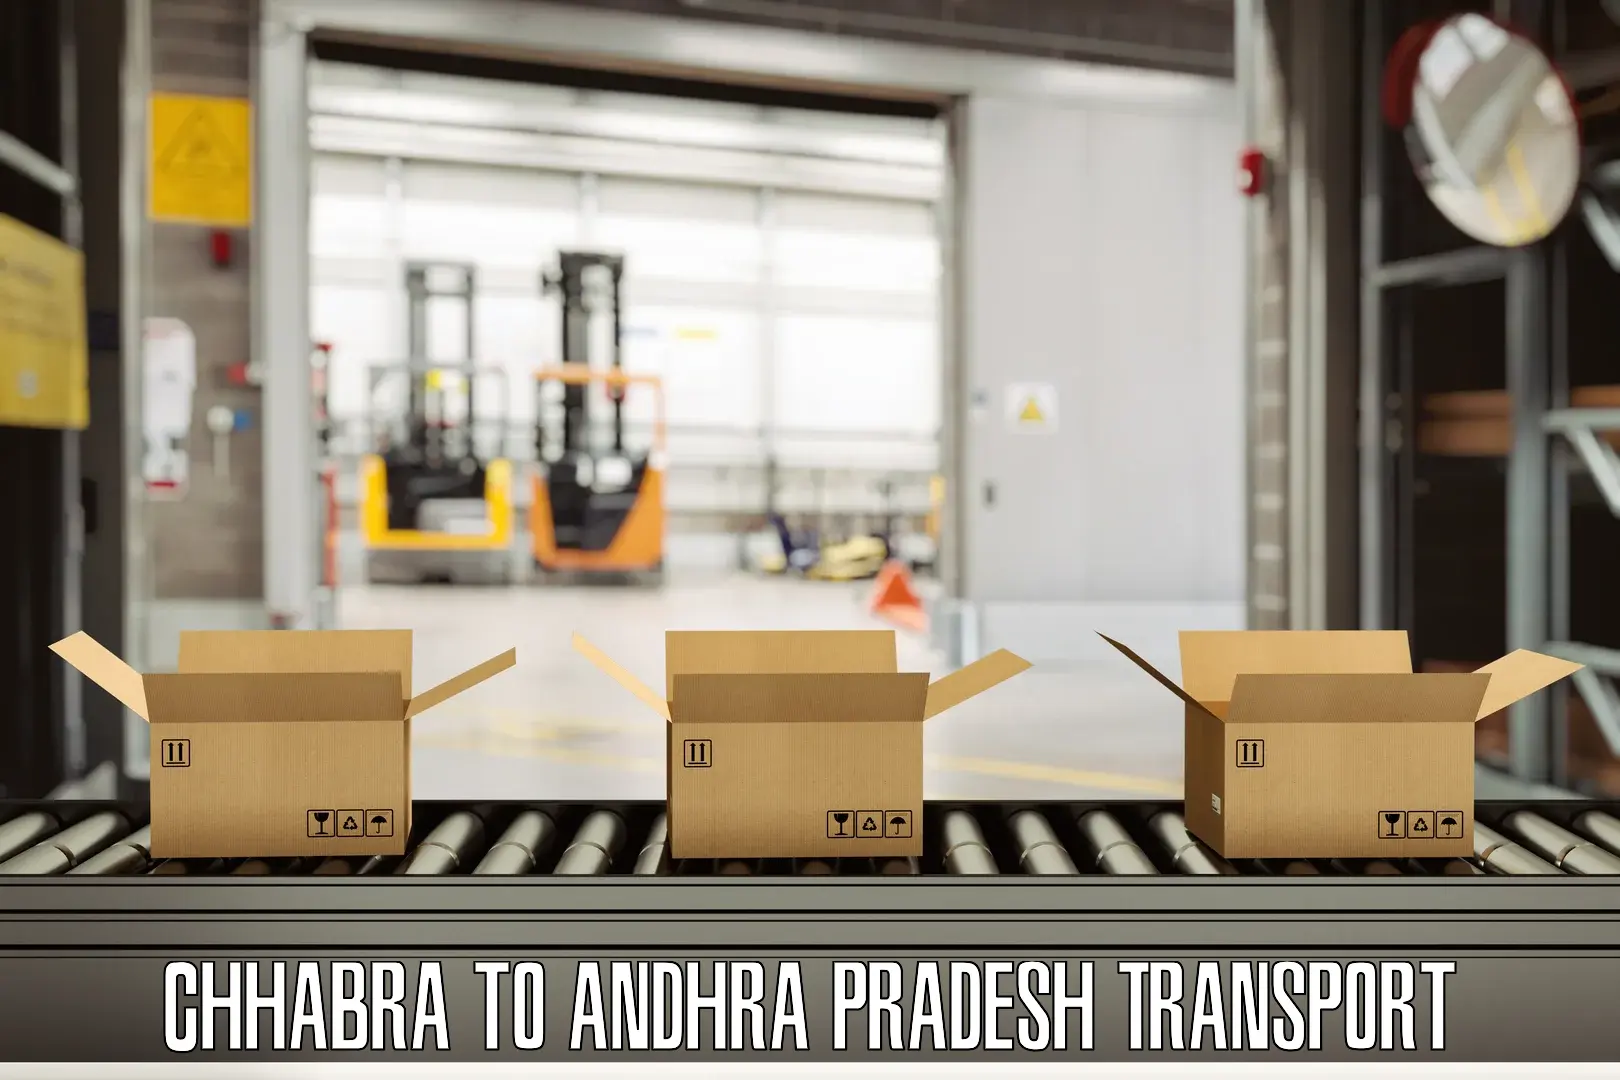 Truck transport companies in India Chhabra to Srisailam